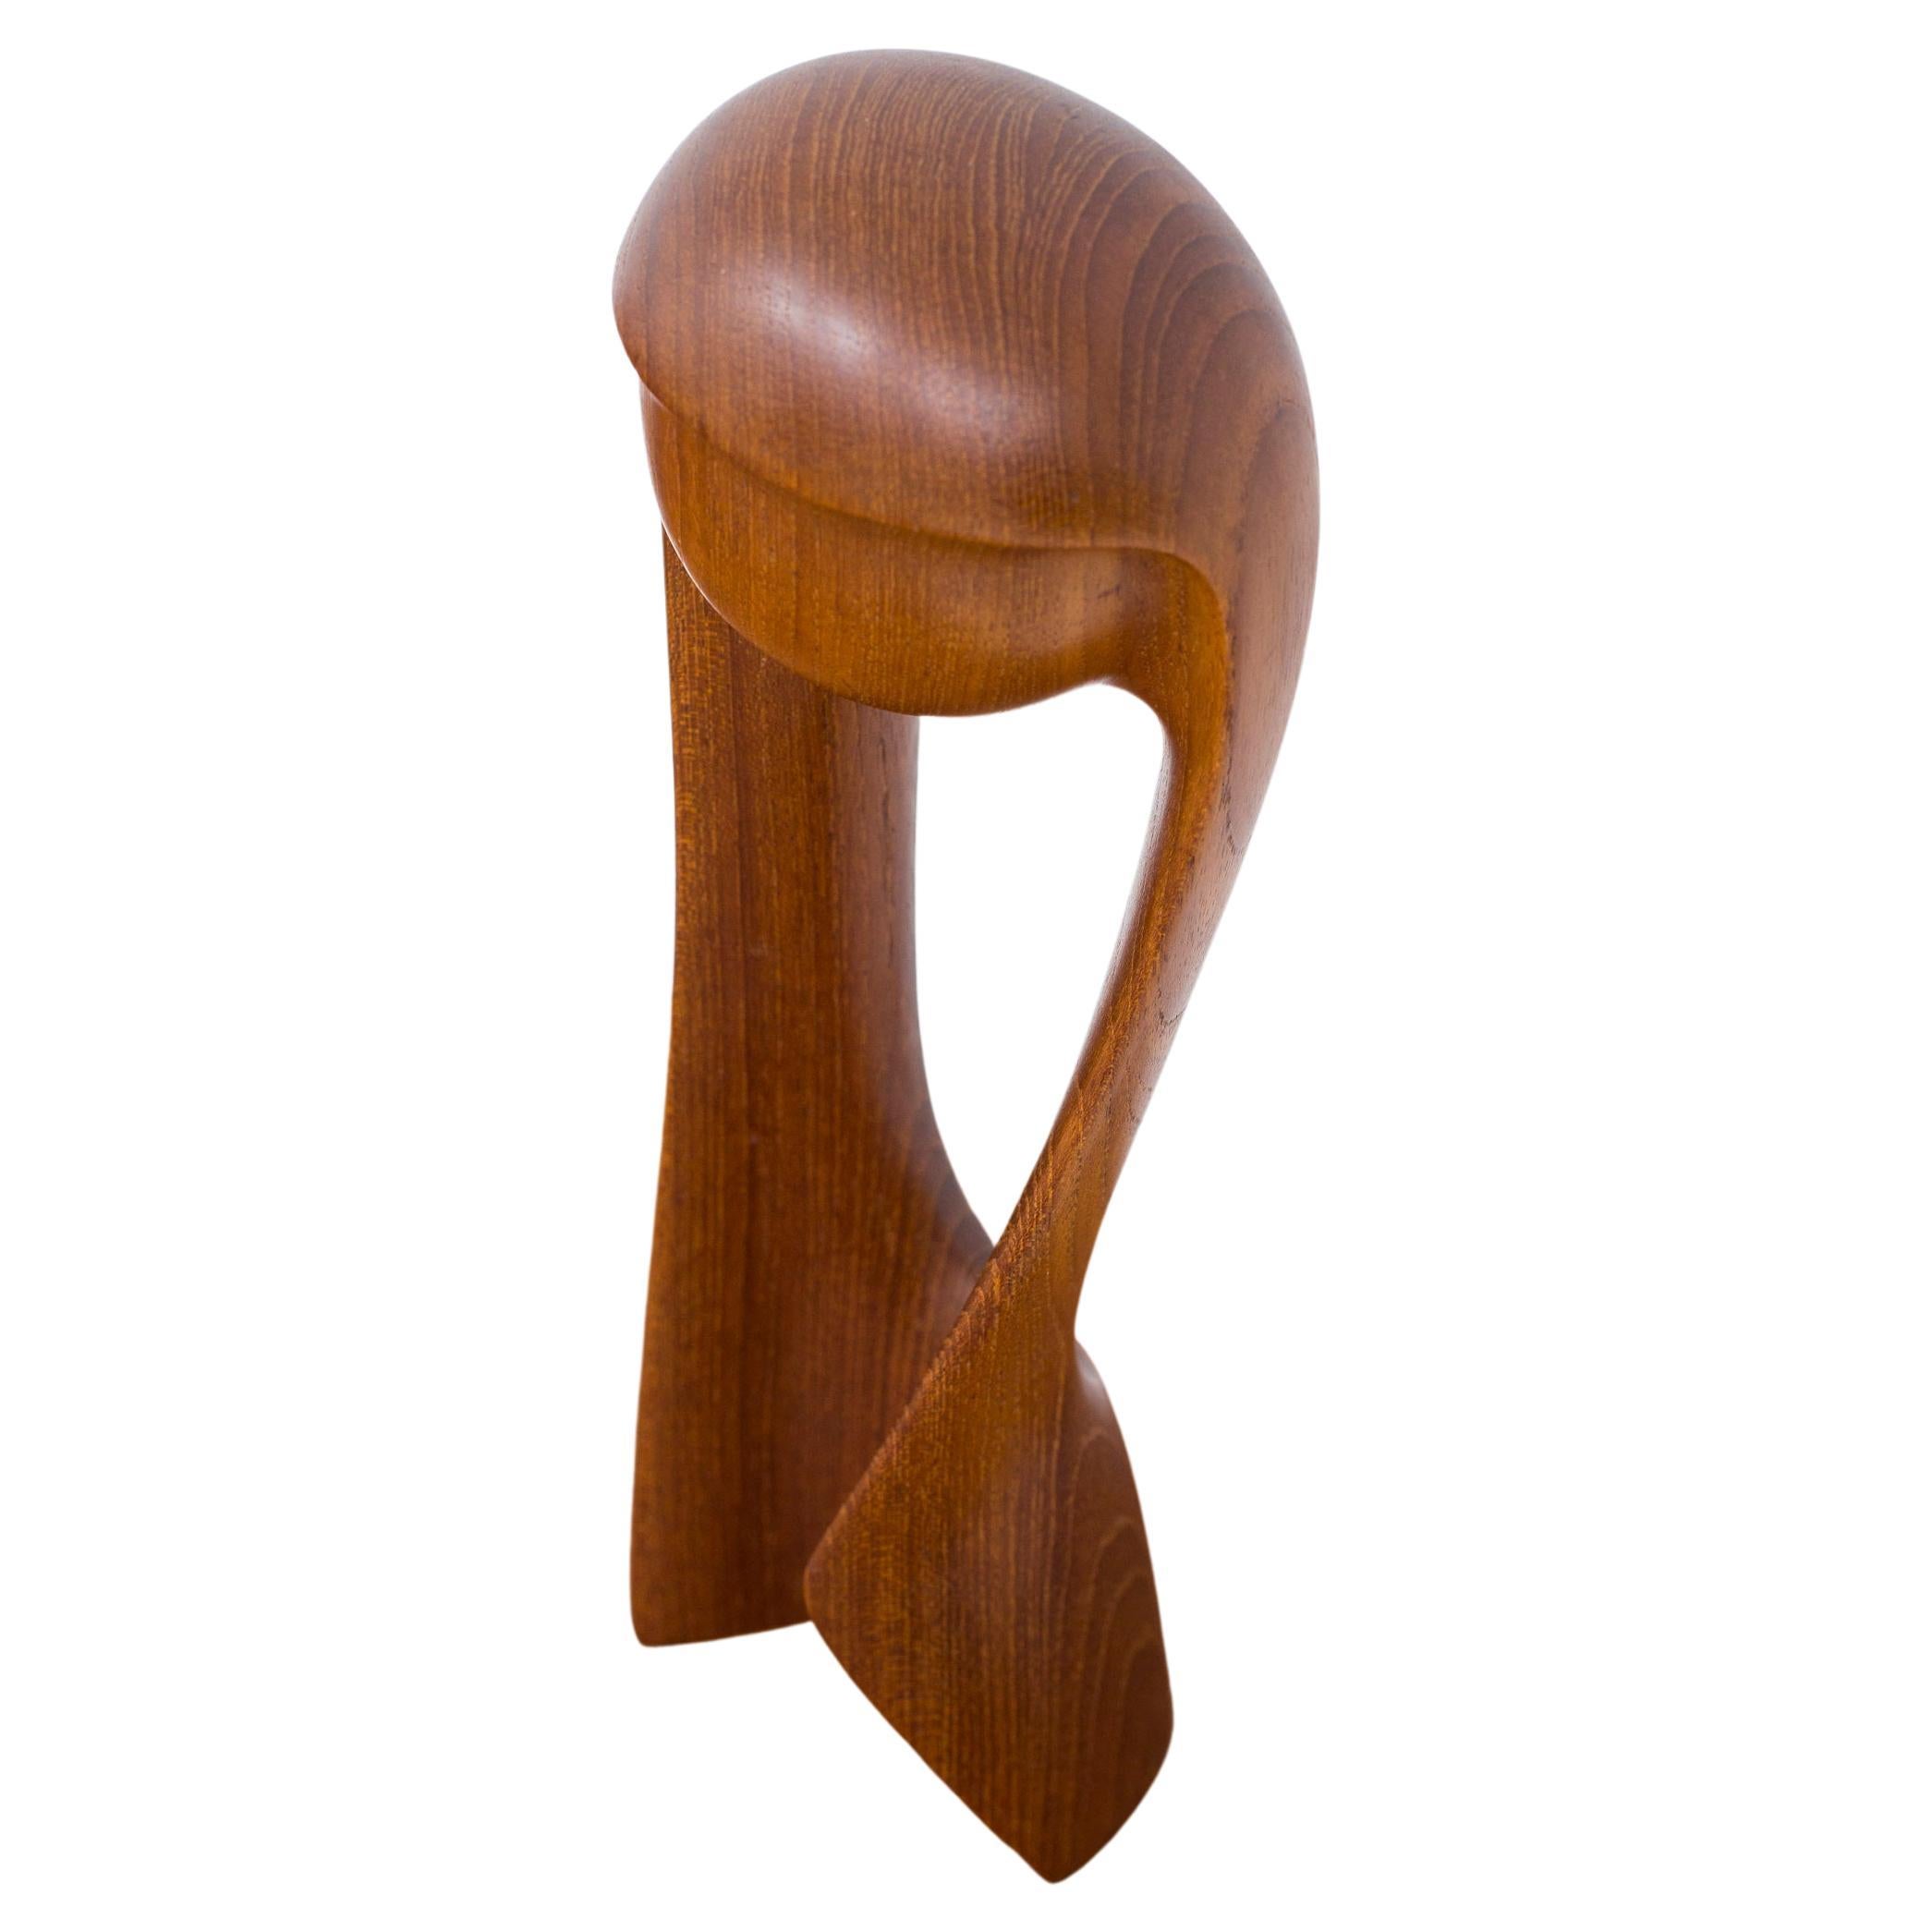 Teak Sculpture by Simon Randers, Produced in Denmark During the, 1950s For  Sale at 1stDibs